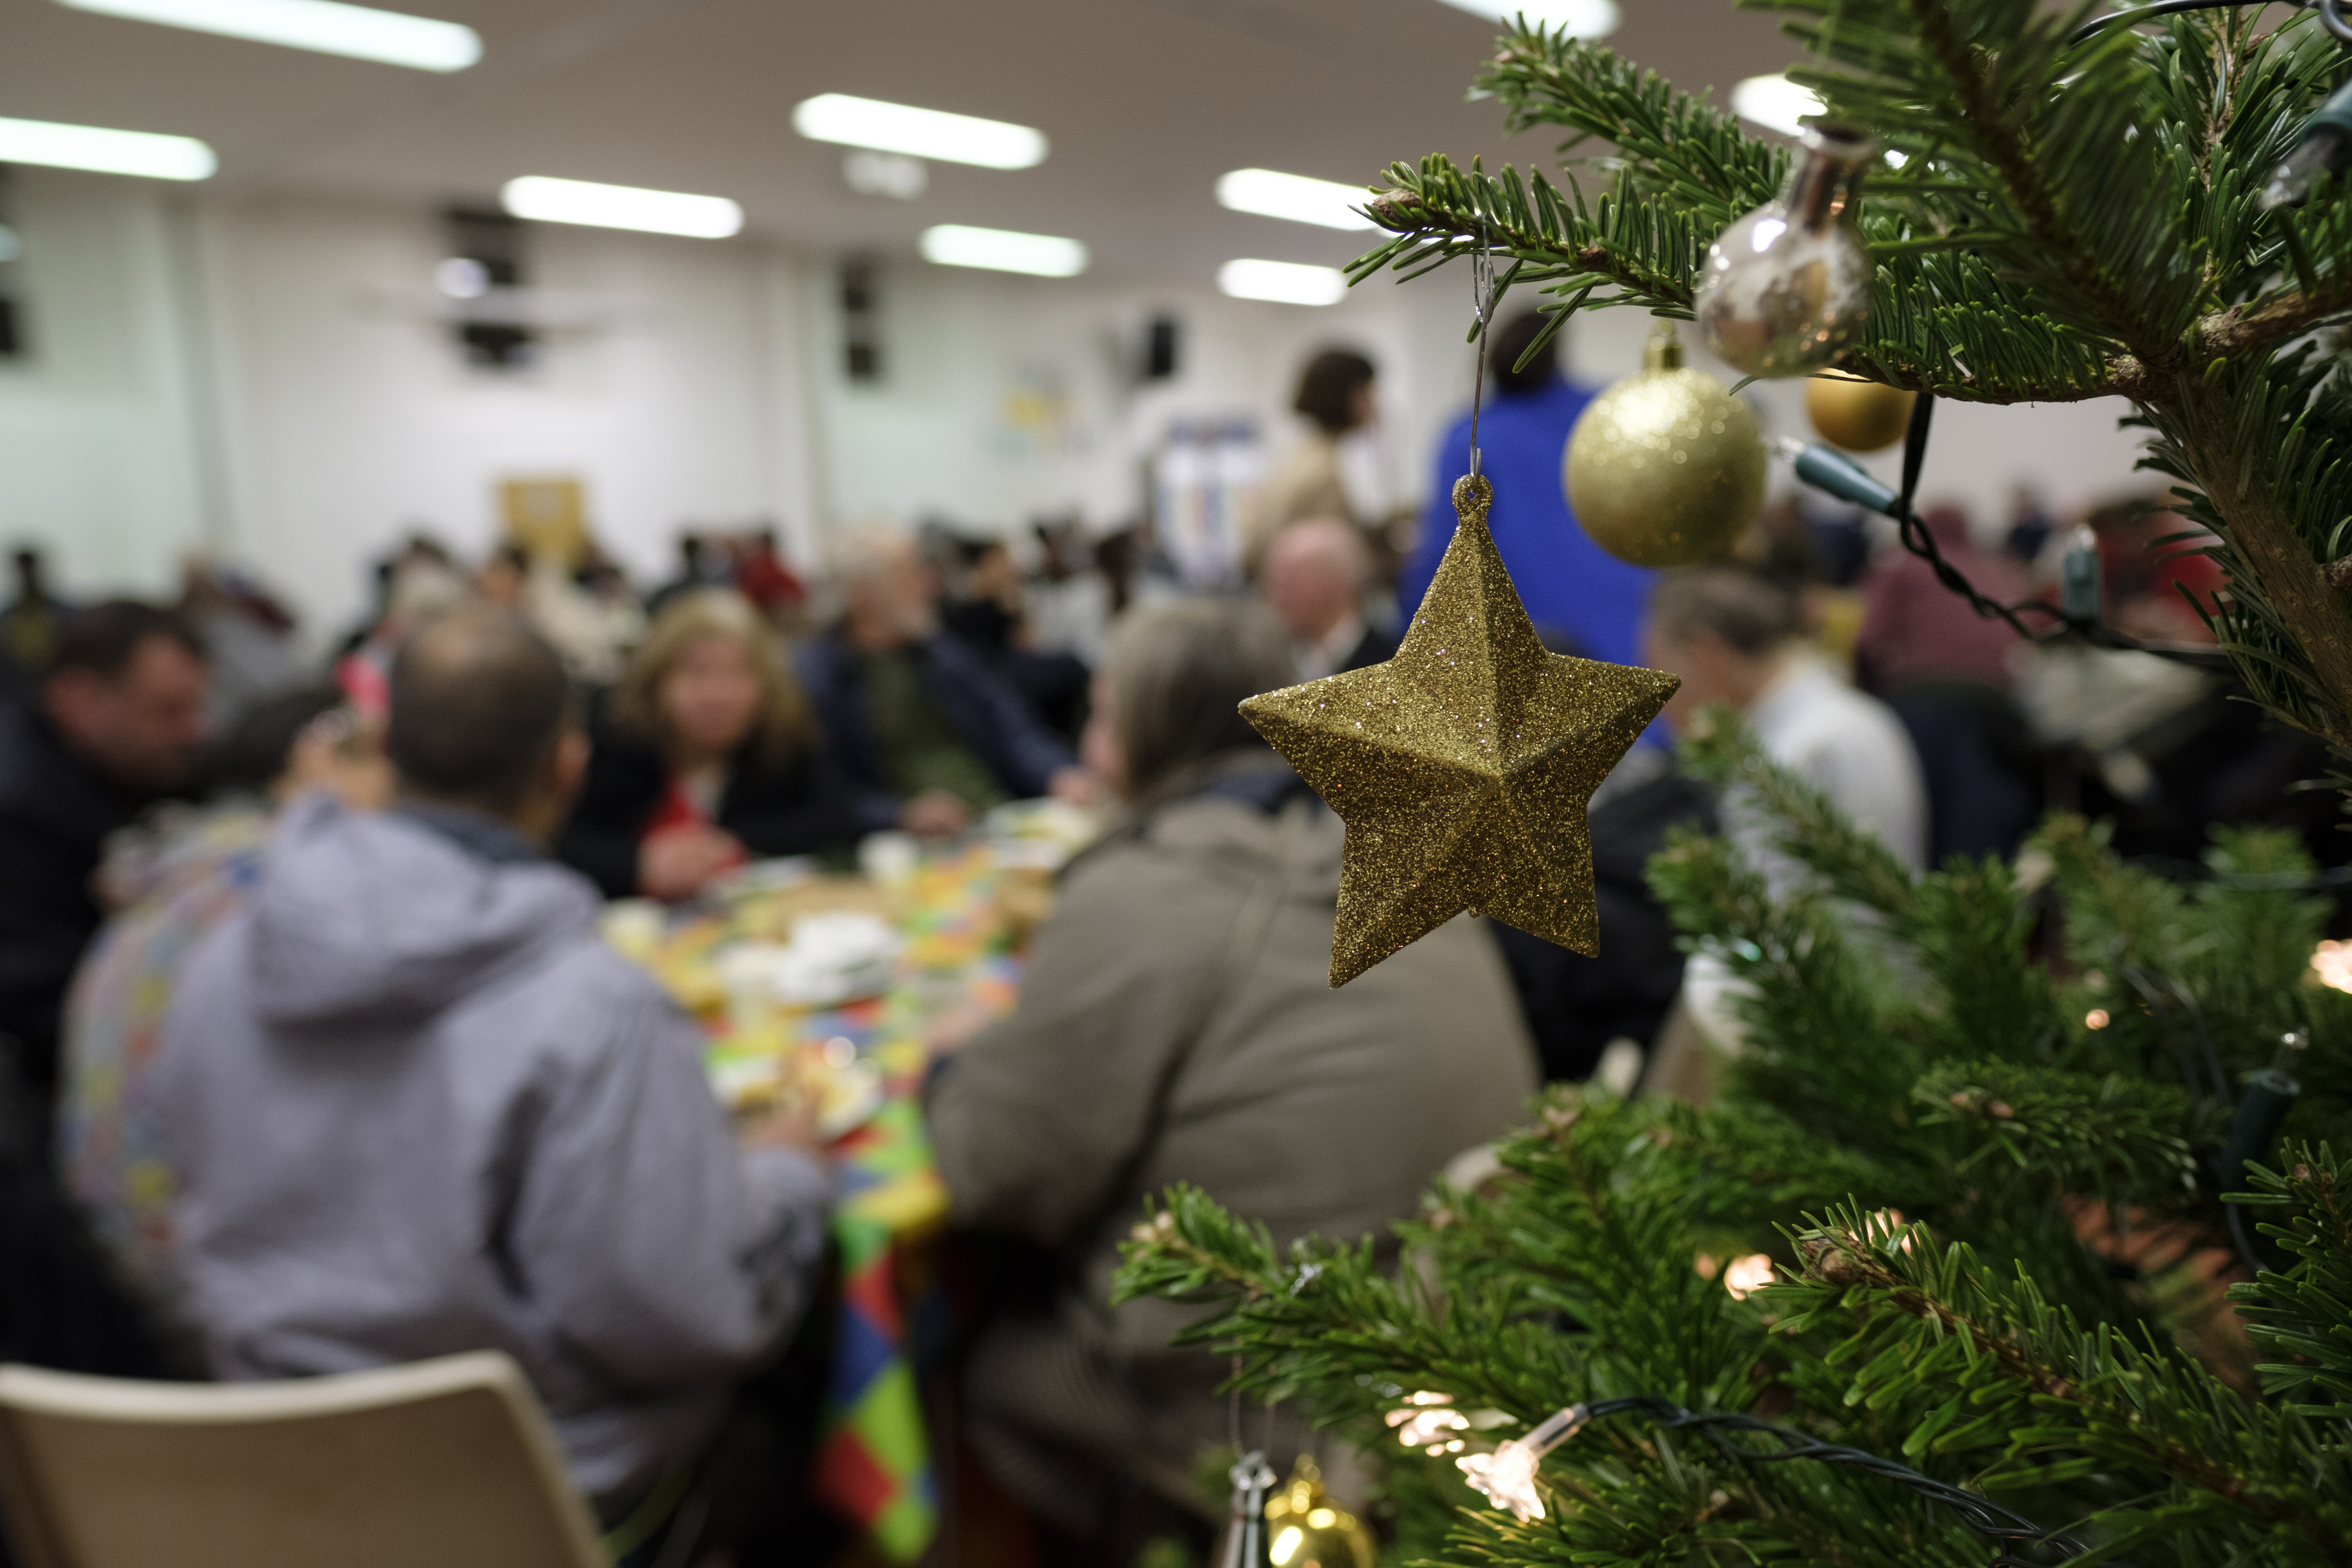 Catford Christmas tree charity aims for biggest year yet